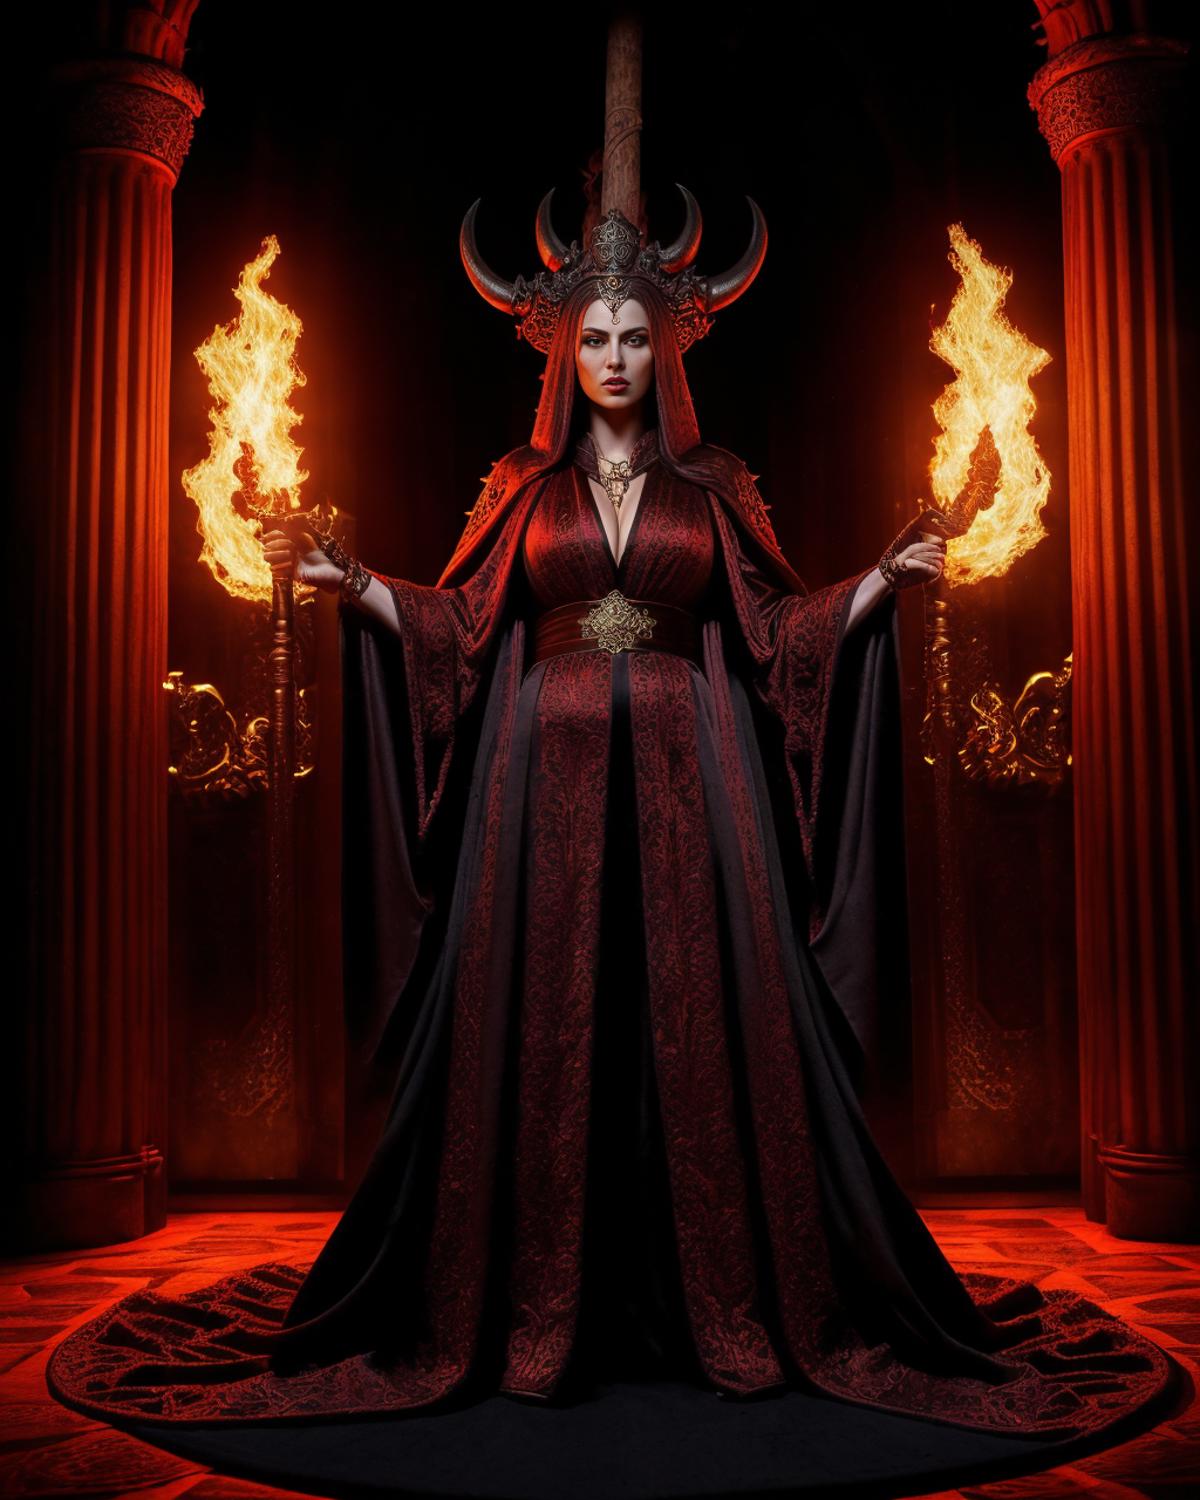 A woman in a red dress holding torches in her hands.